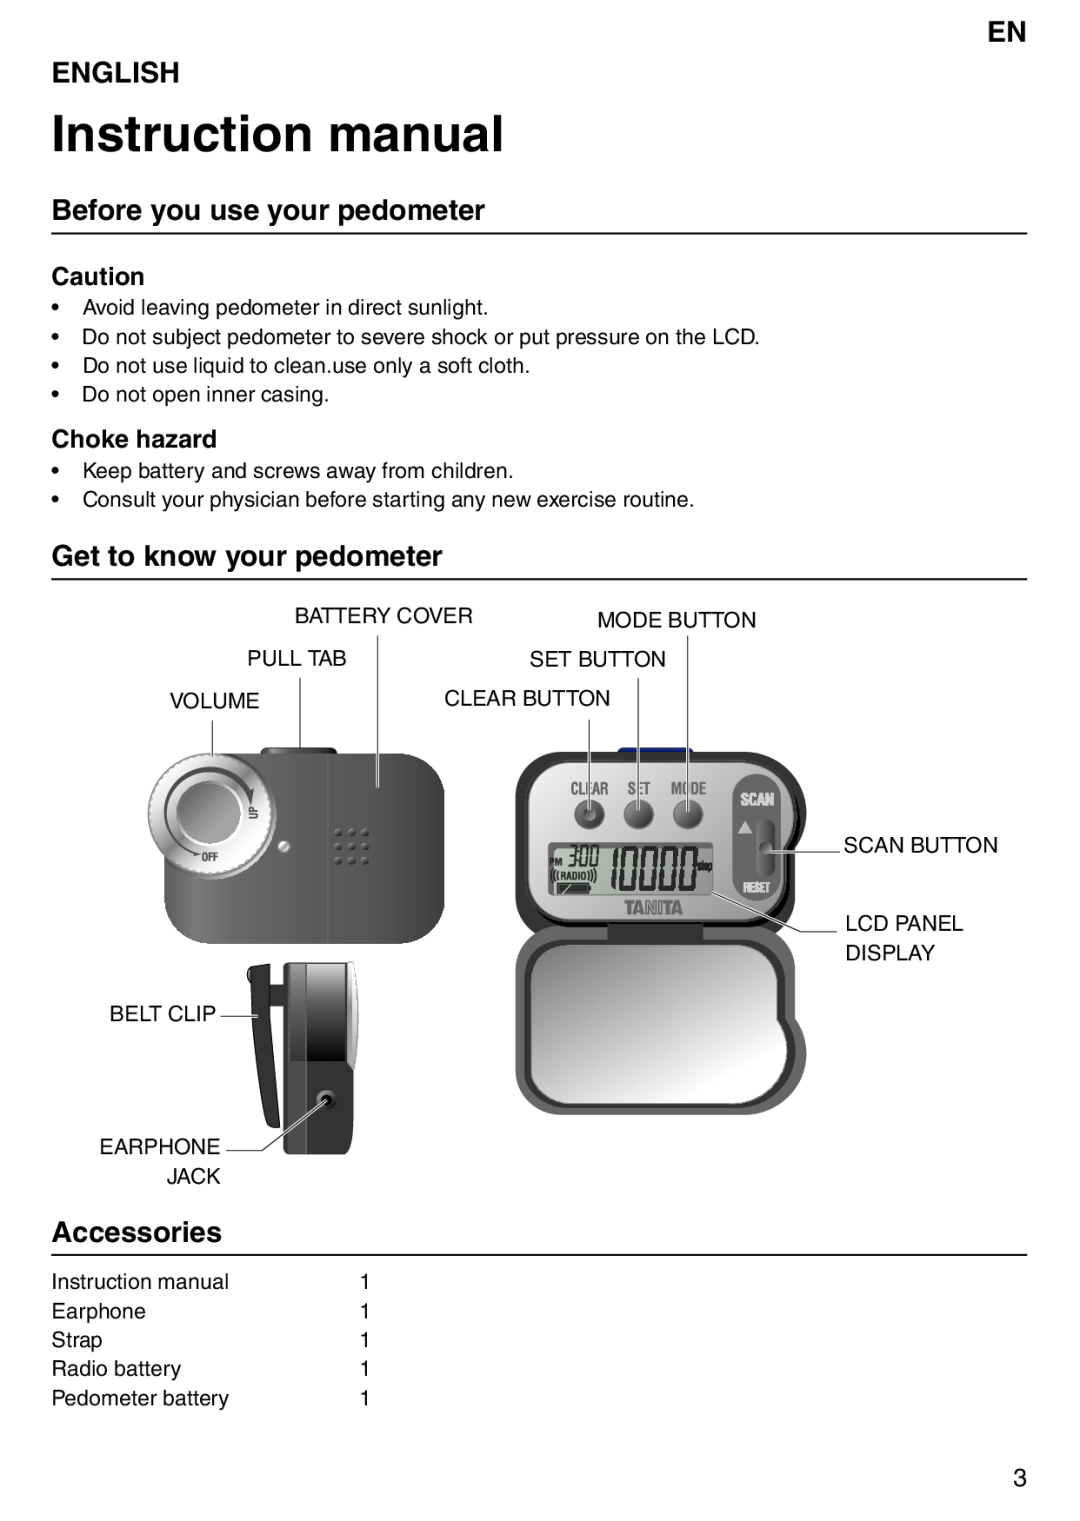 Tanita PD640 En English, Before you use your pedometer, Get to know your pedometer, Accessories, Choke hazard 